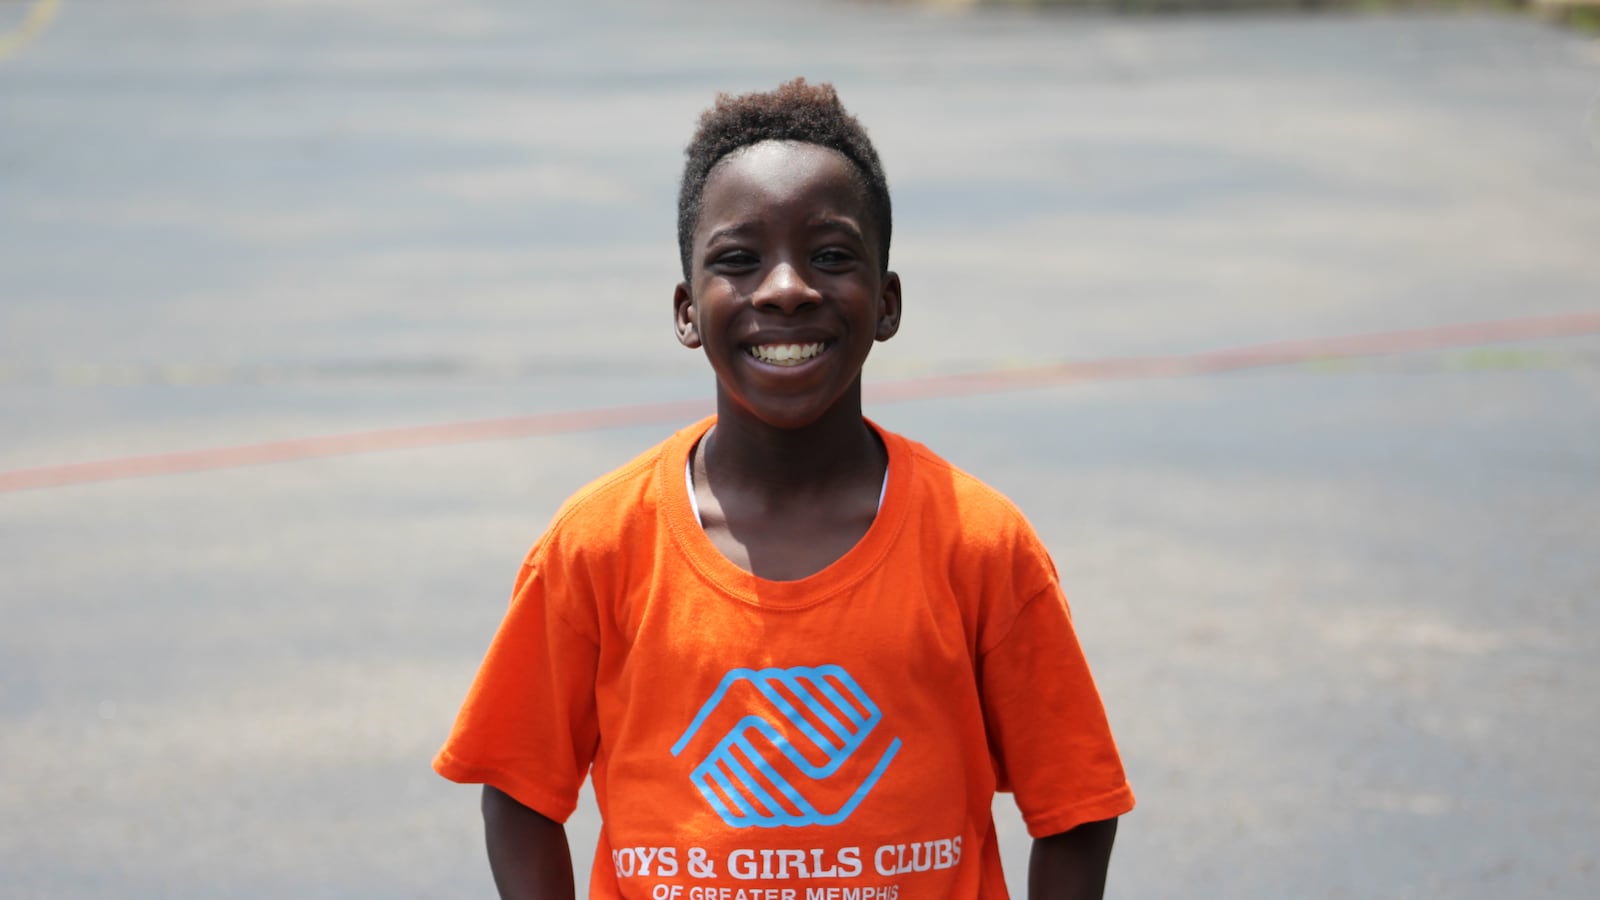 The Boys & Girls Club operates seven clubs in Memphis.